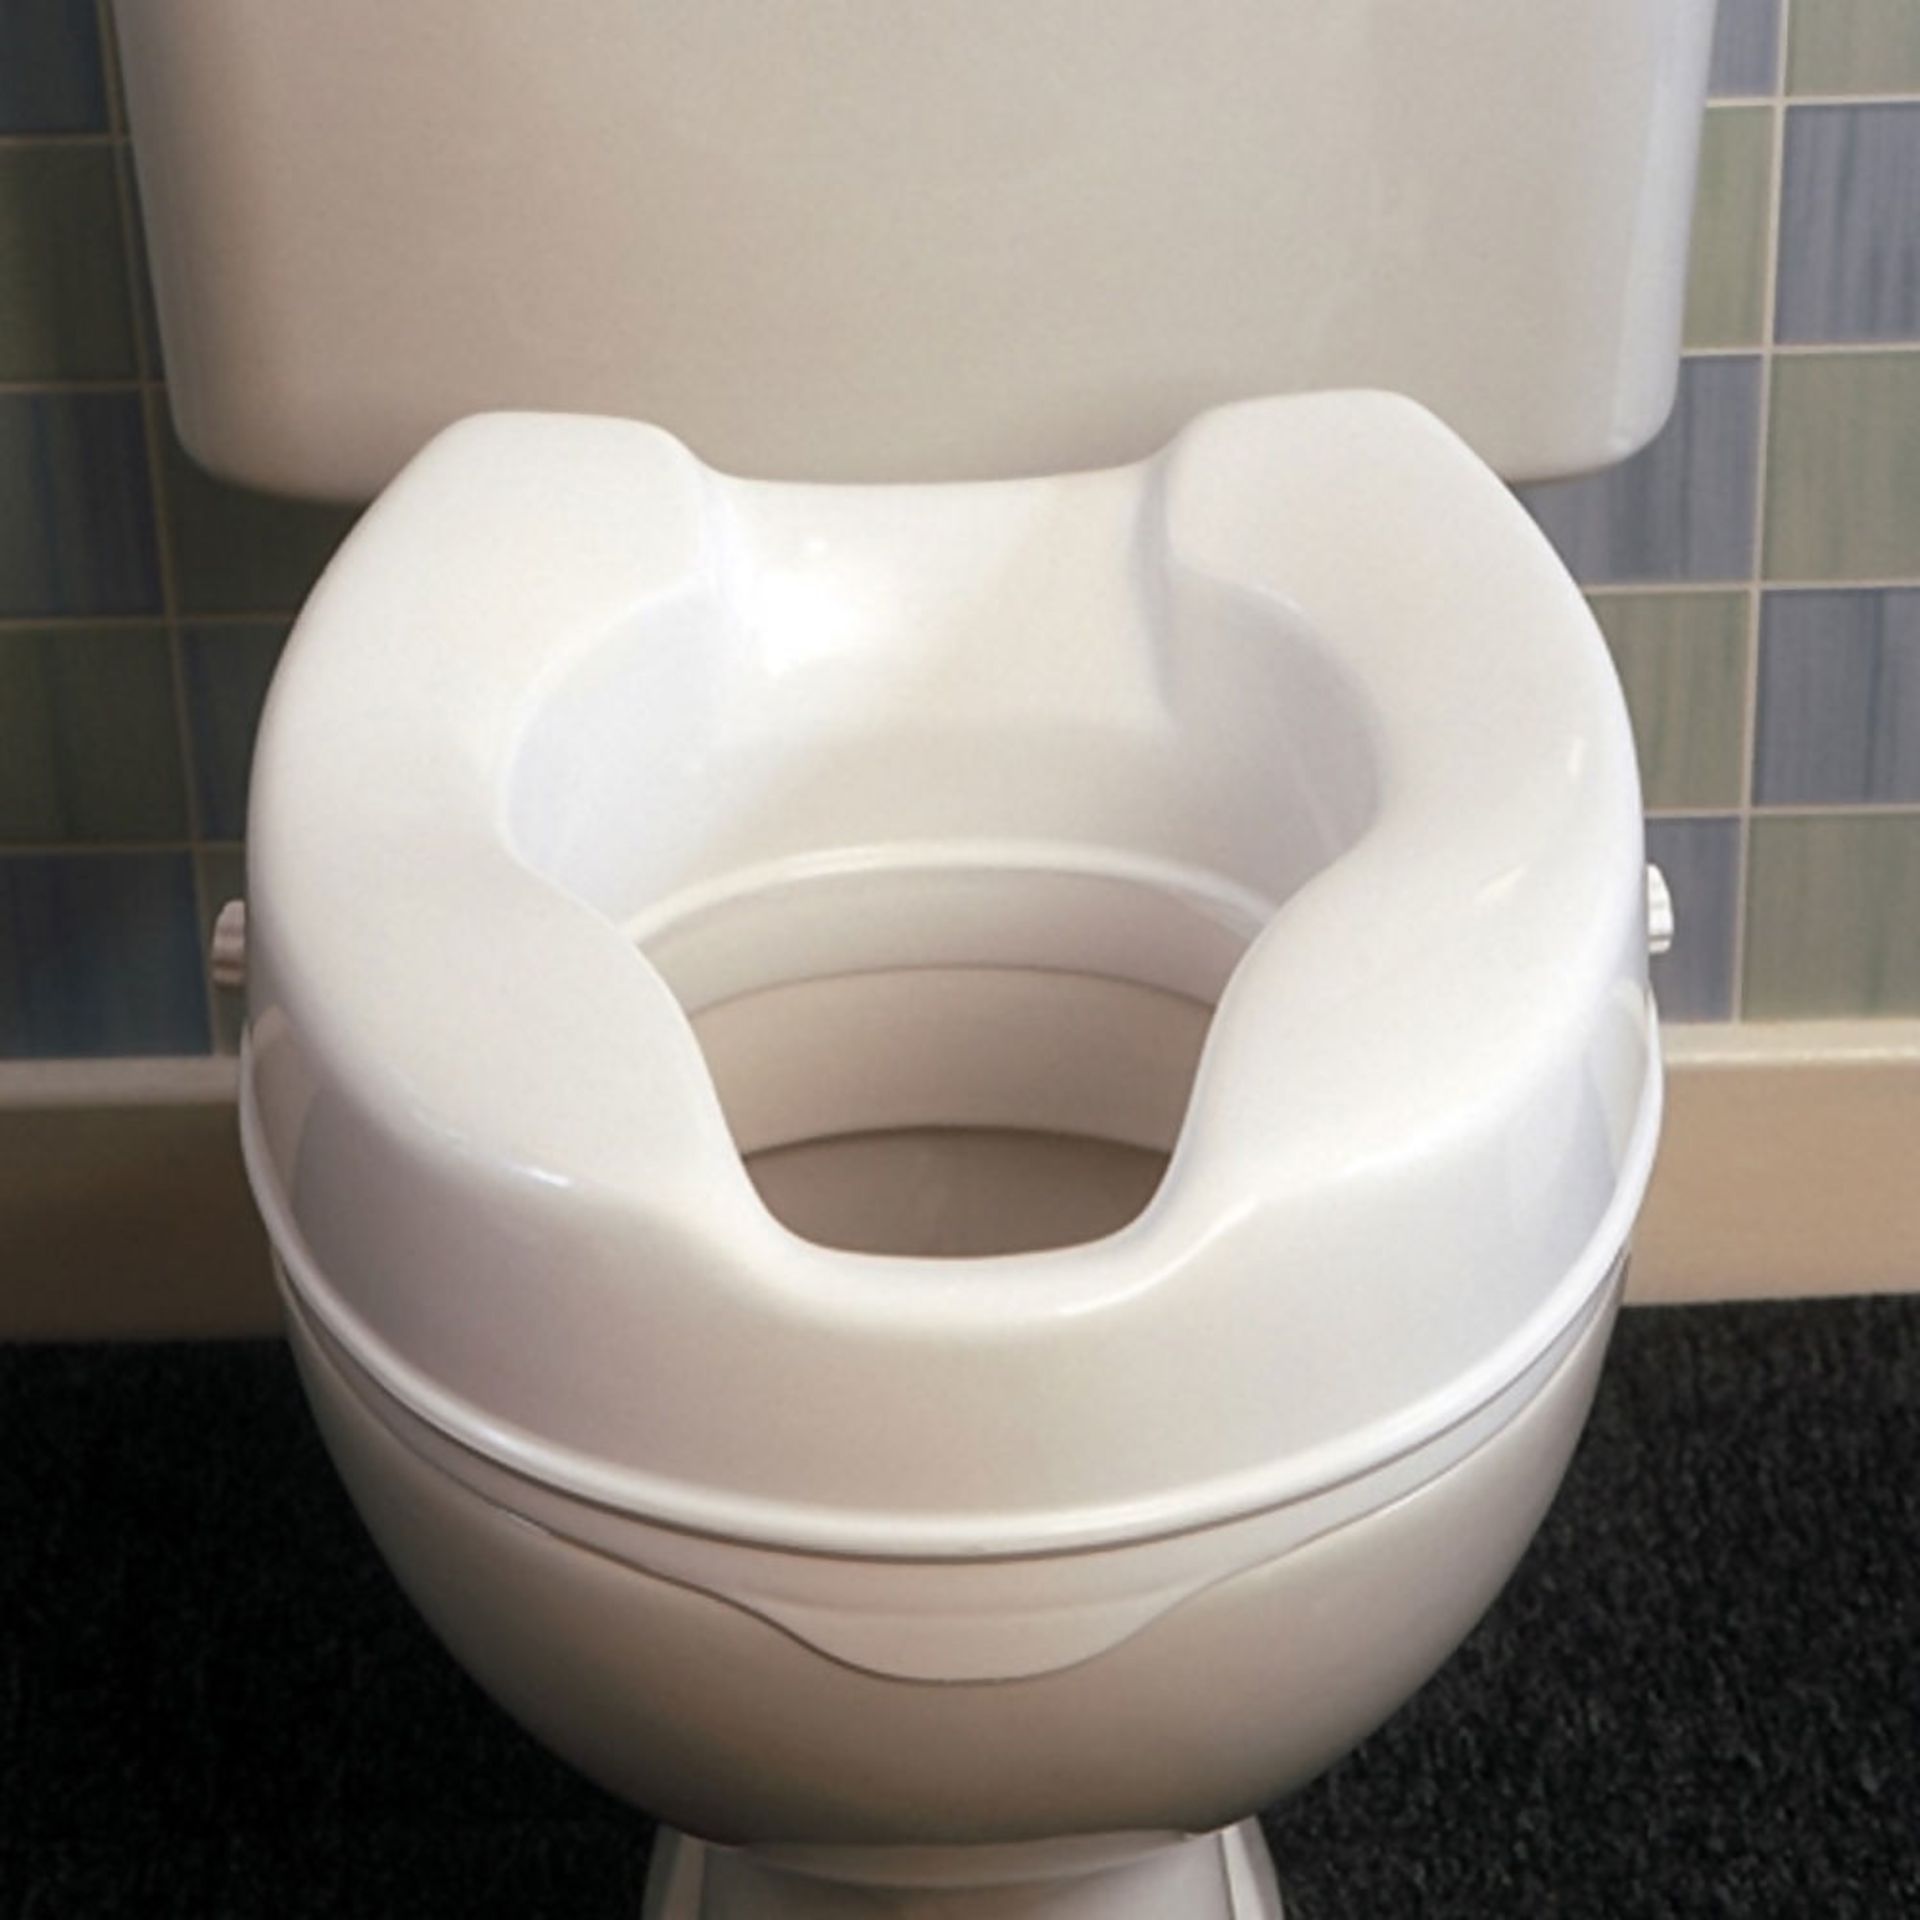 X 2 HOMECRAFT SAVANNAH RASIED TOILET SEATS RRP £32Condition ReportAppraisal Available on Request-